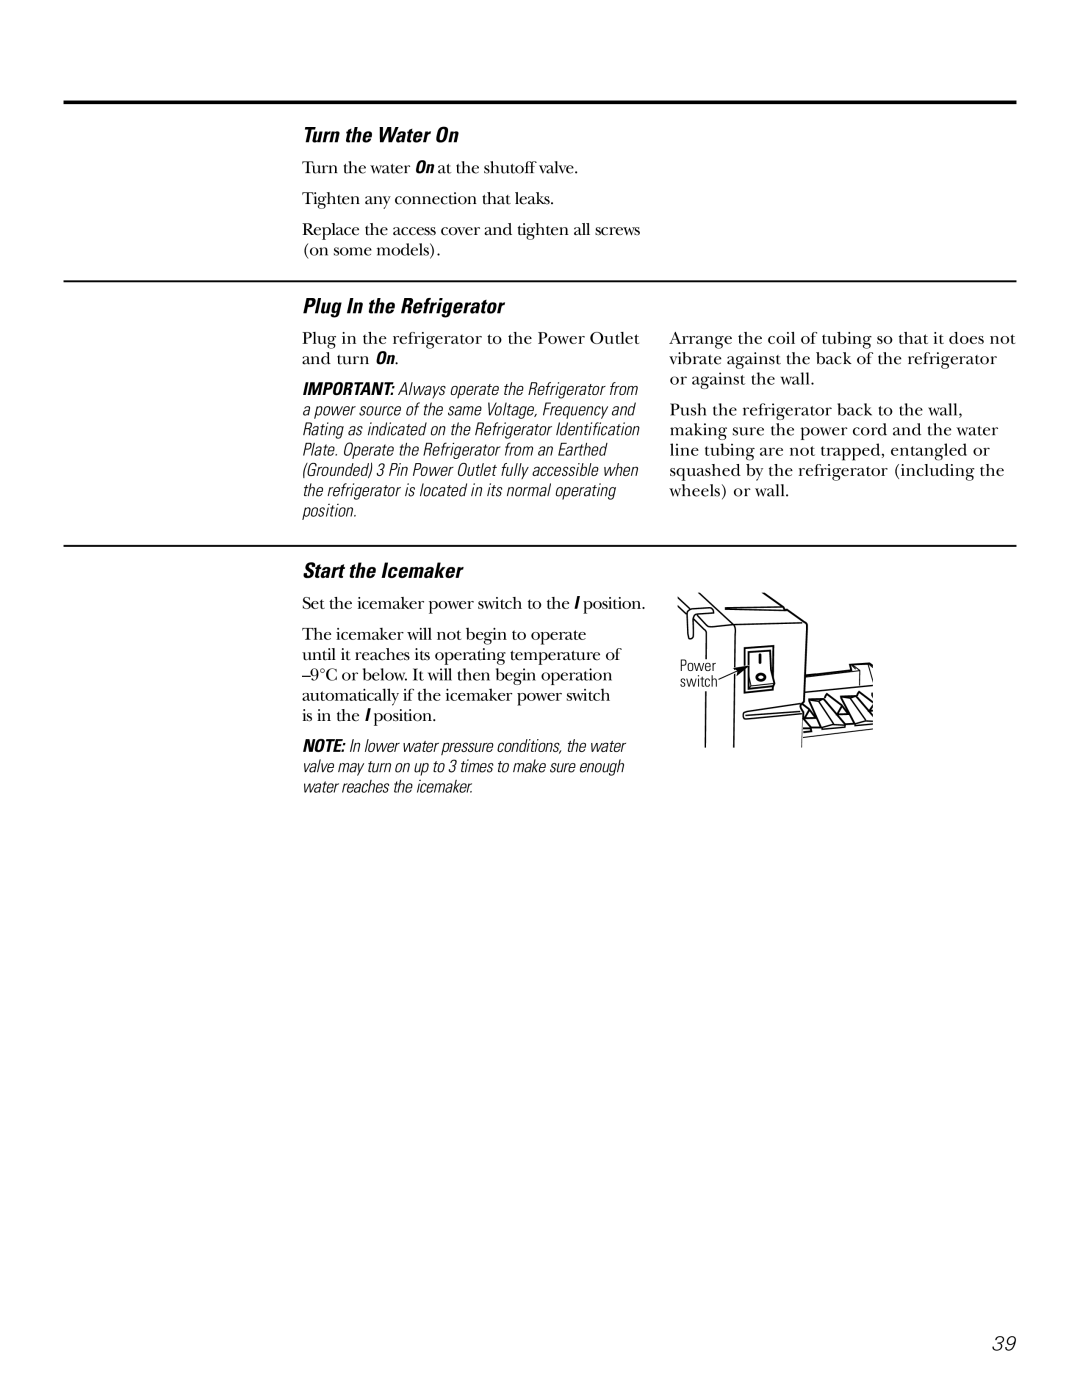 Hotpoint 23 operating instructions Turn the Water On, Plug In the Refrigerator, Start the Icemaker 